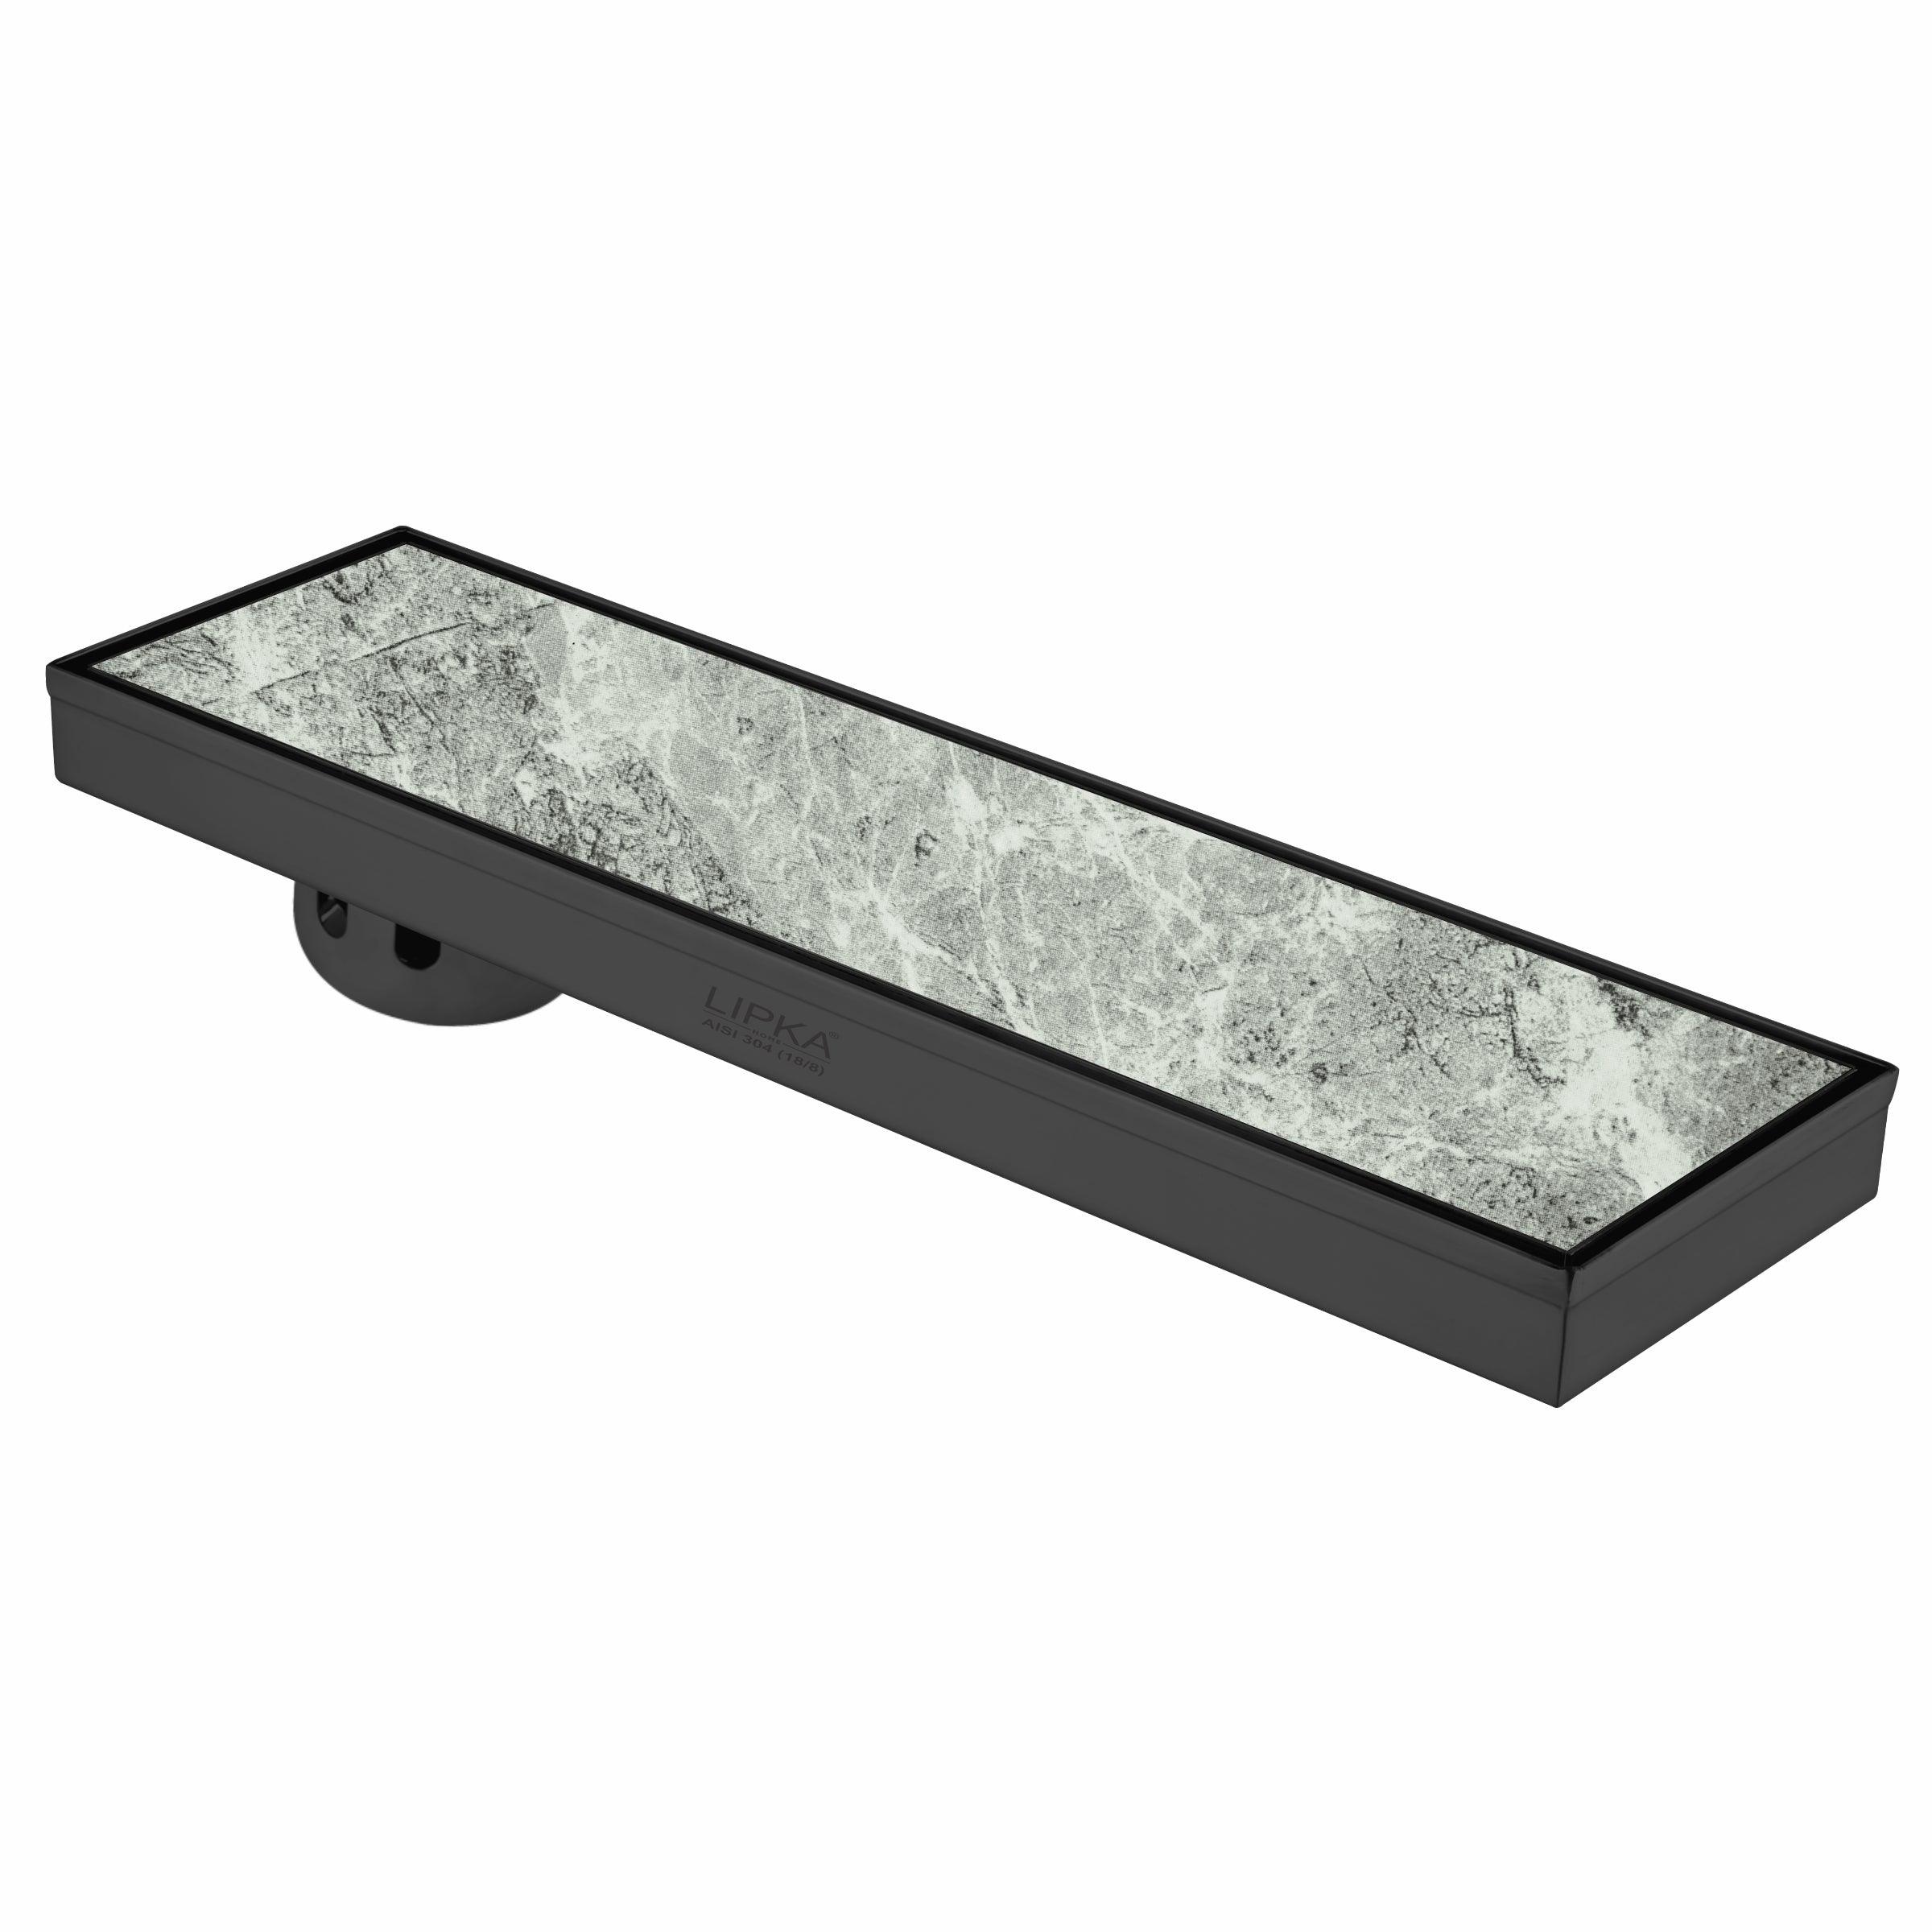 Tile Insert Shower Drain Channel - Black (32 x 5 Inches) 